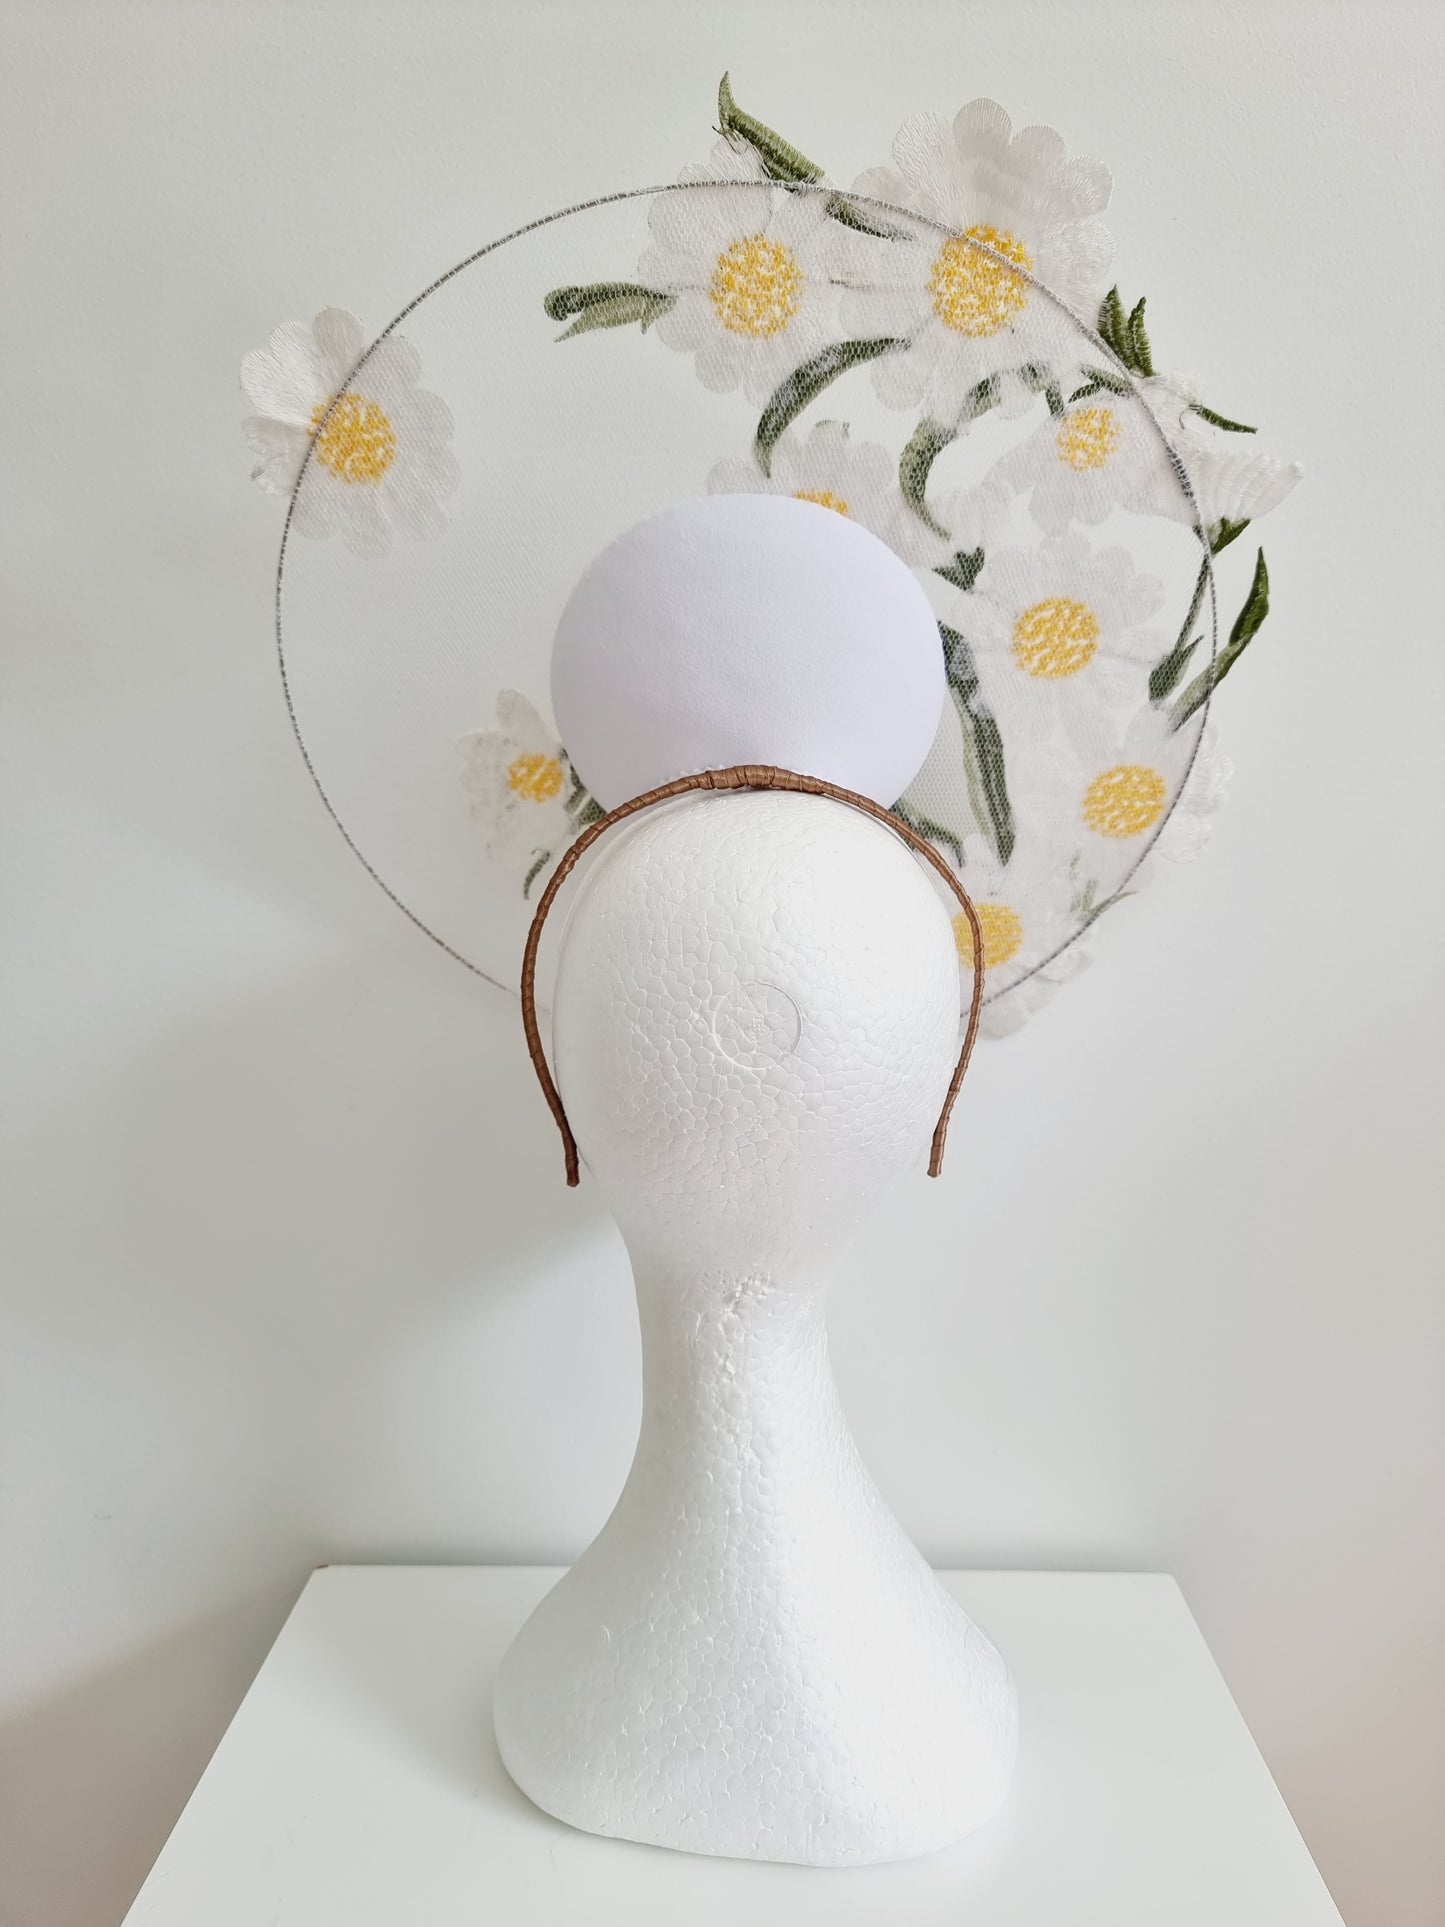 Miss Ups a Daisy. Womens white satellite percher headband fascinator with embroidered daisy